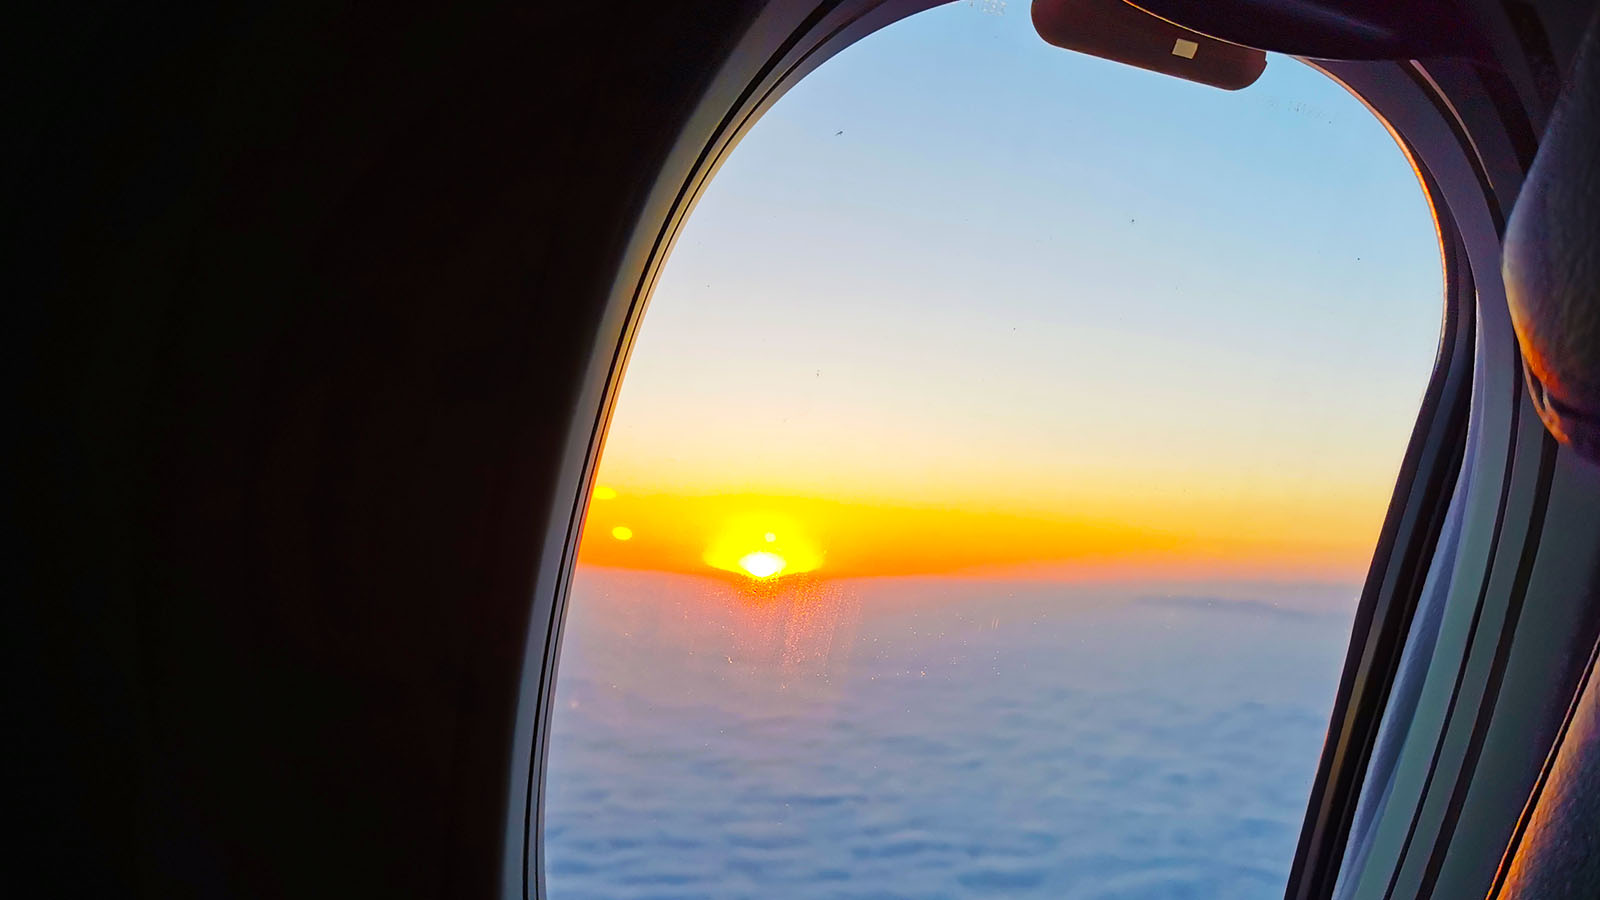 Sunset from American Airlines Boeing 737 Economy